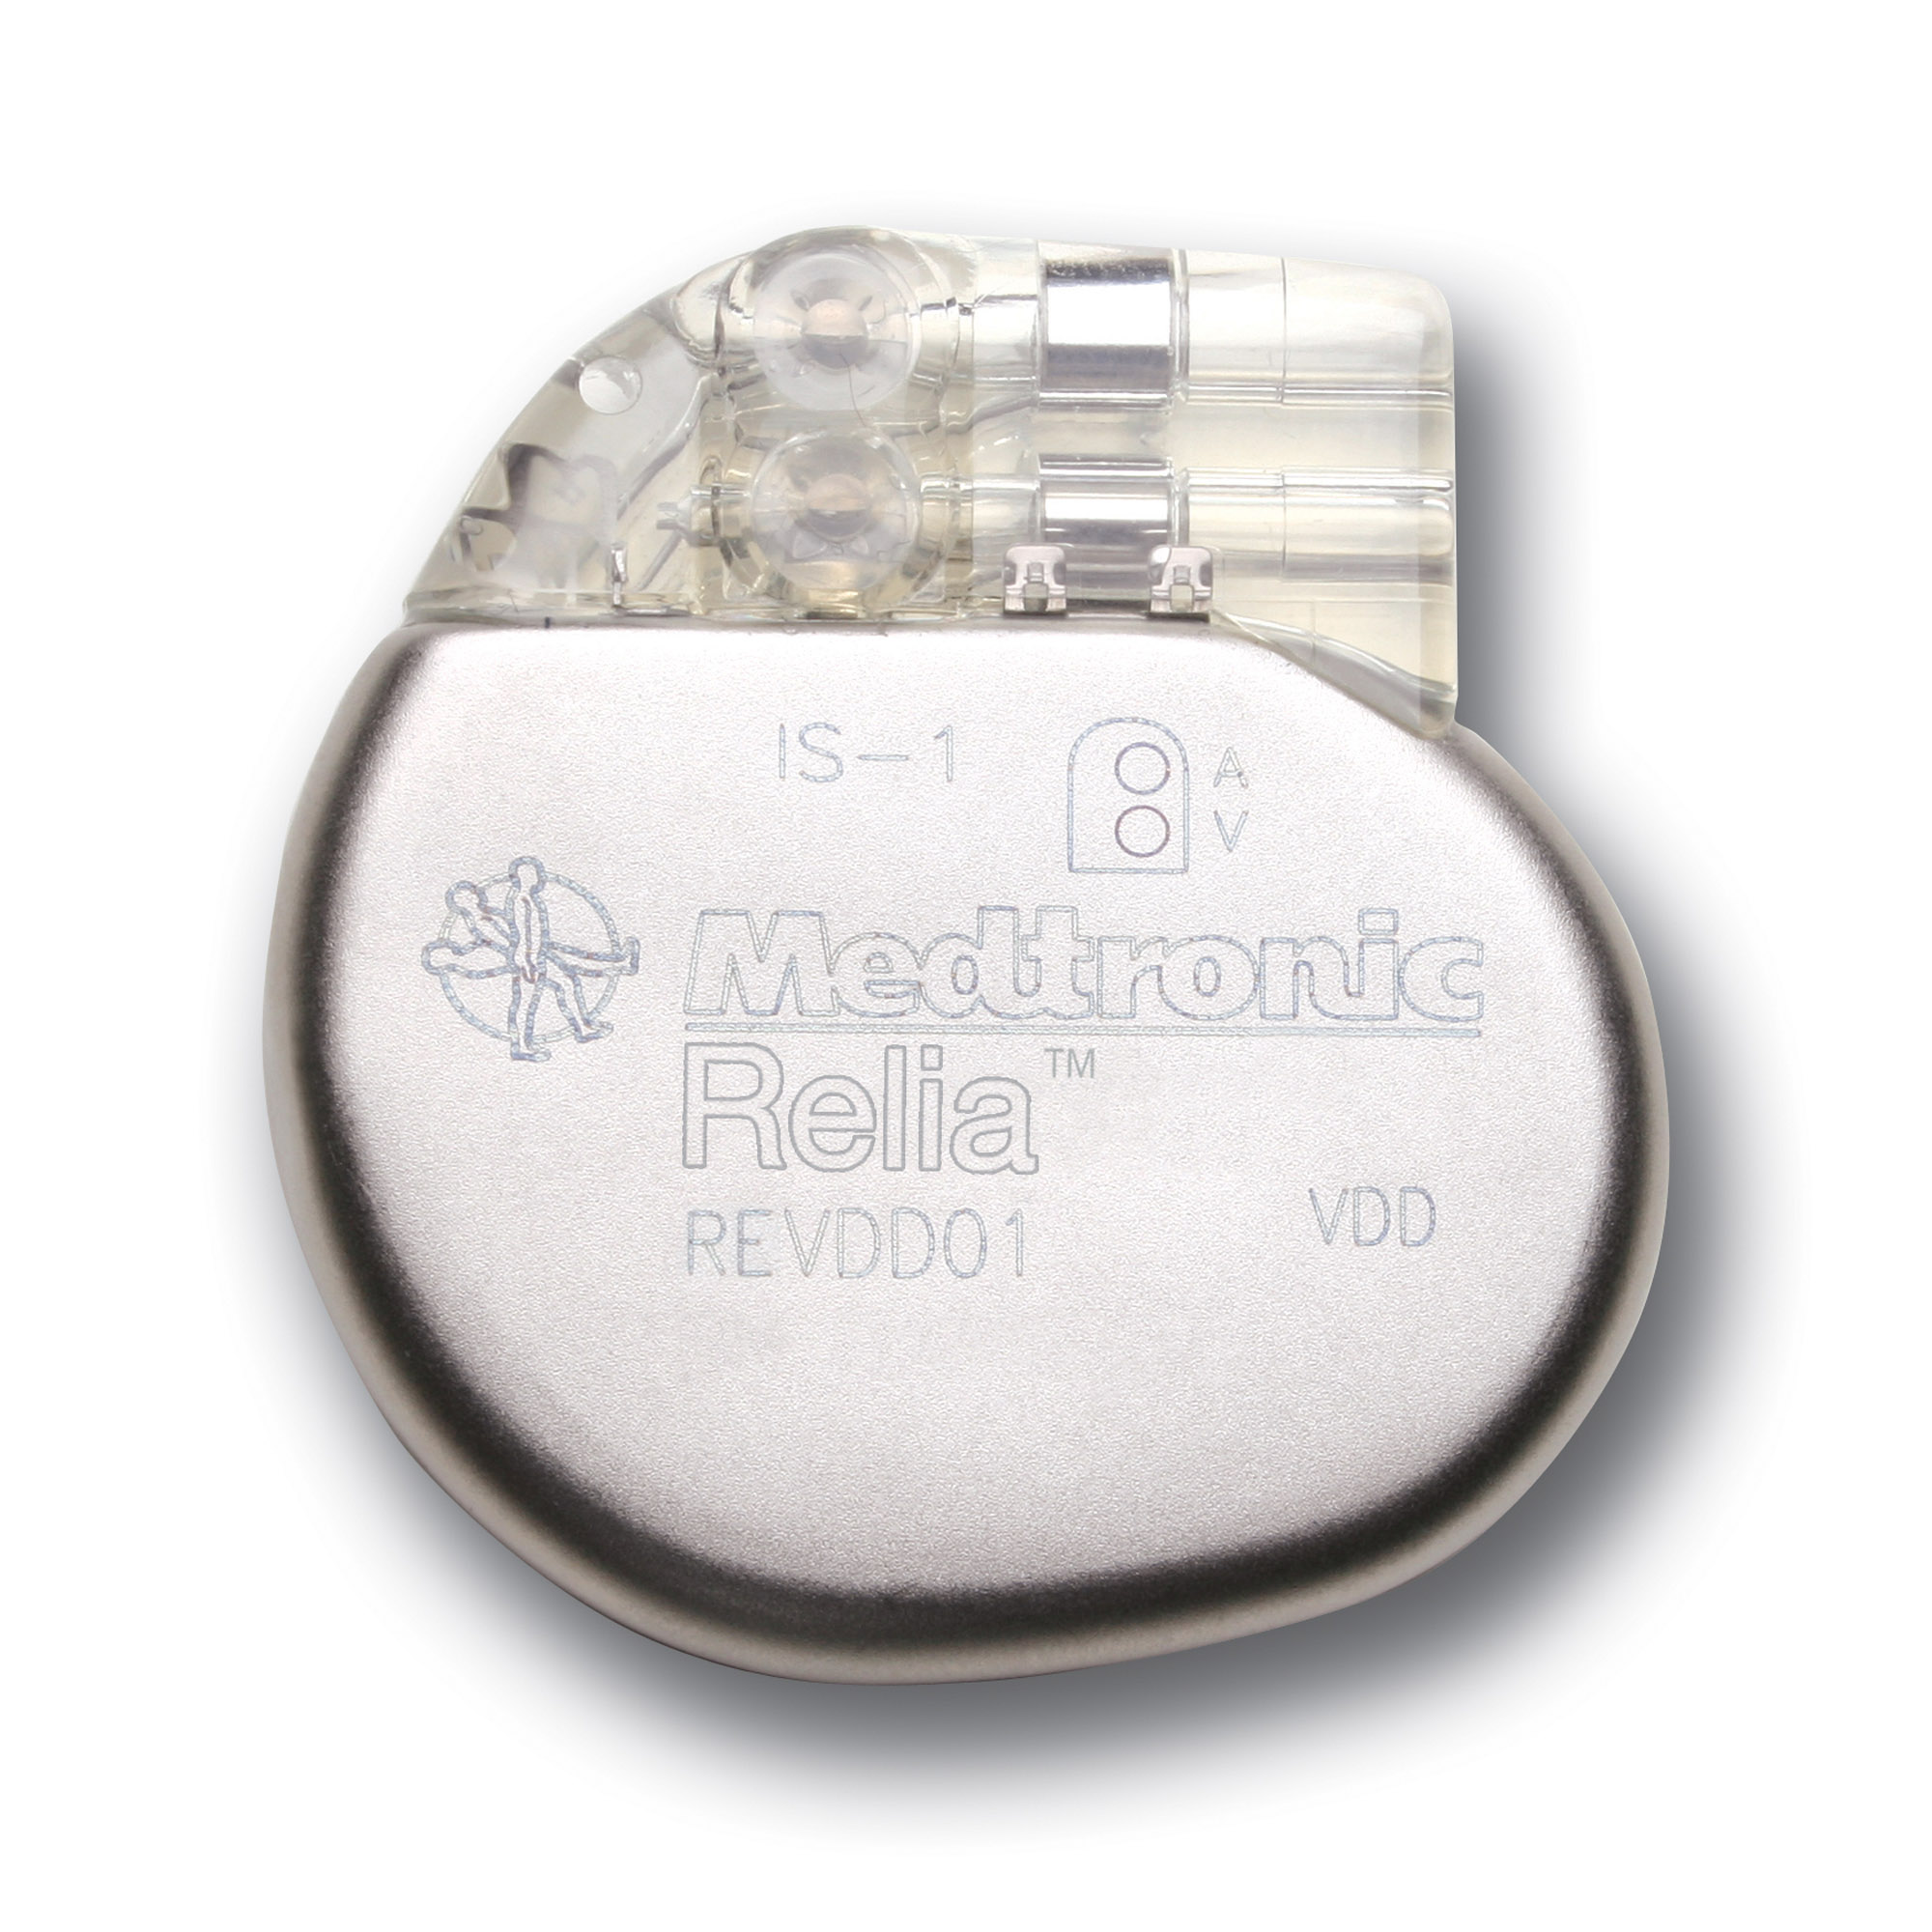 Medtronic Pacemaker Models